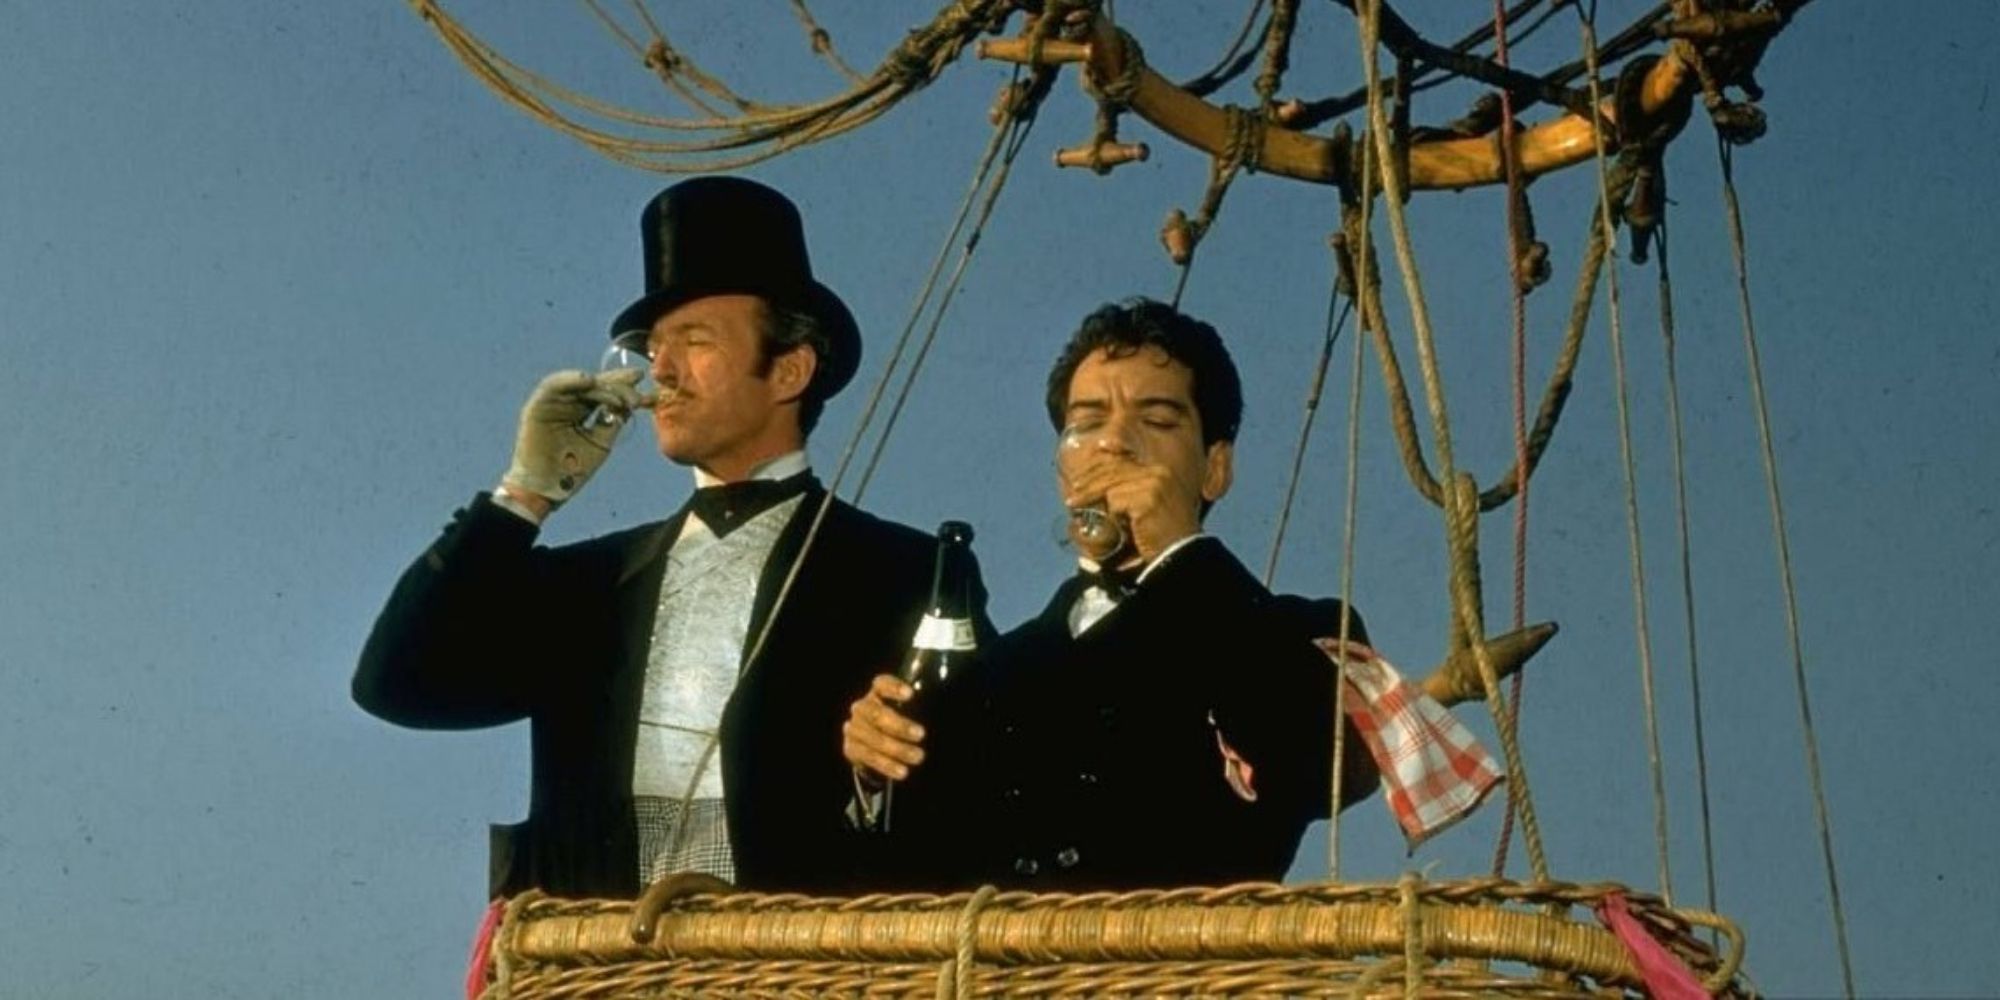 Phileas Fogg and Passepartout standing in a hot air balloon and drinking champagne in Around the World in Eighty Days